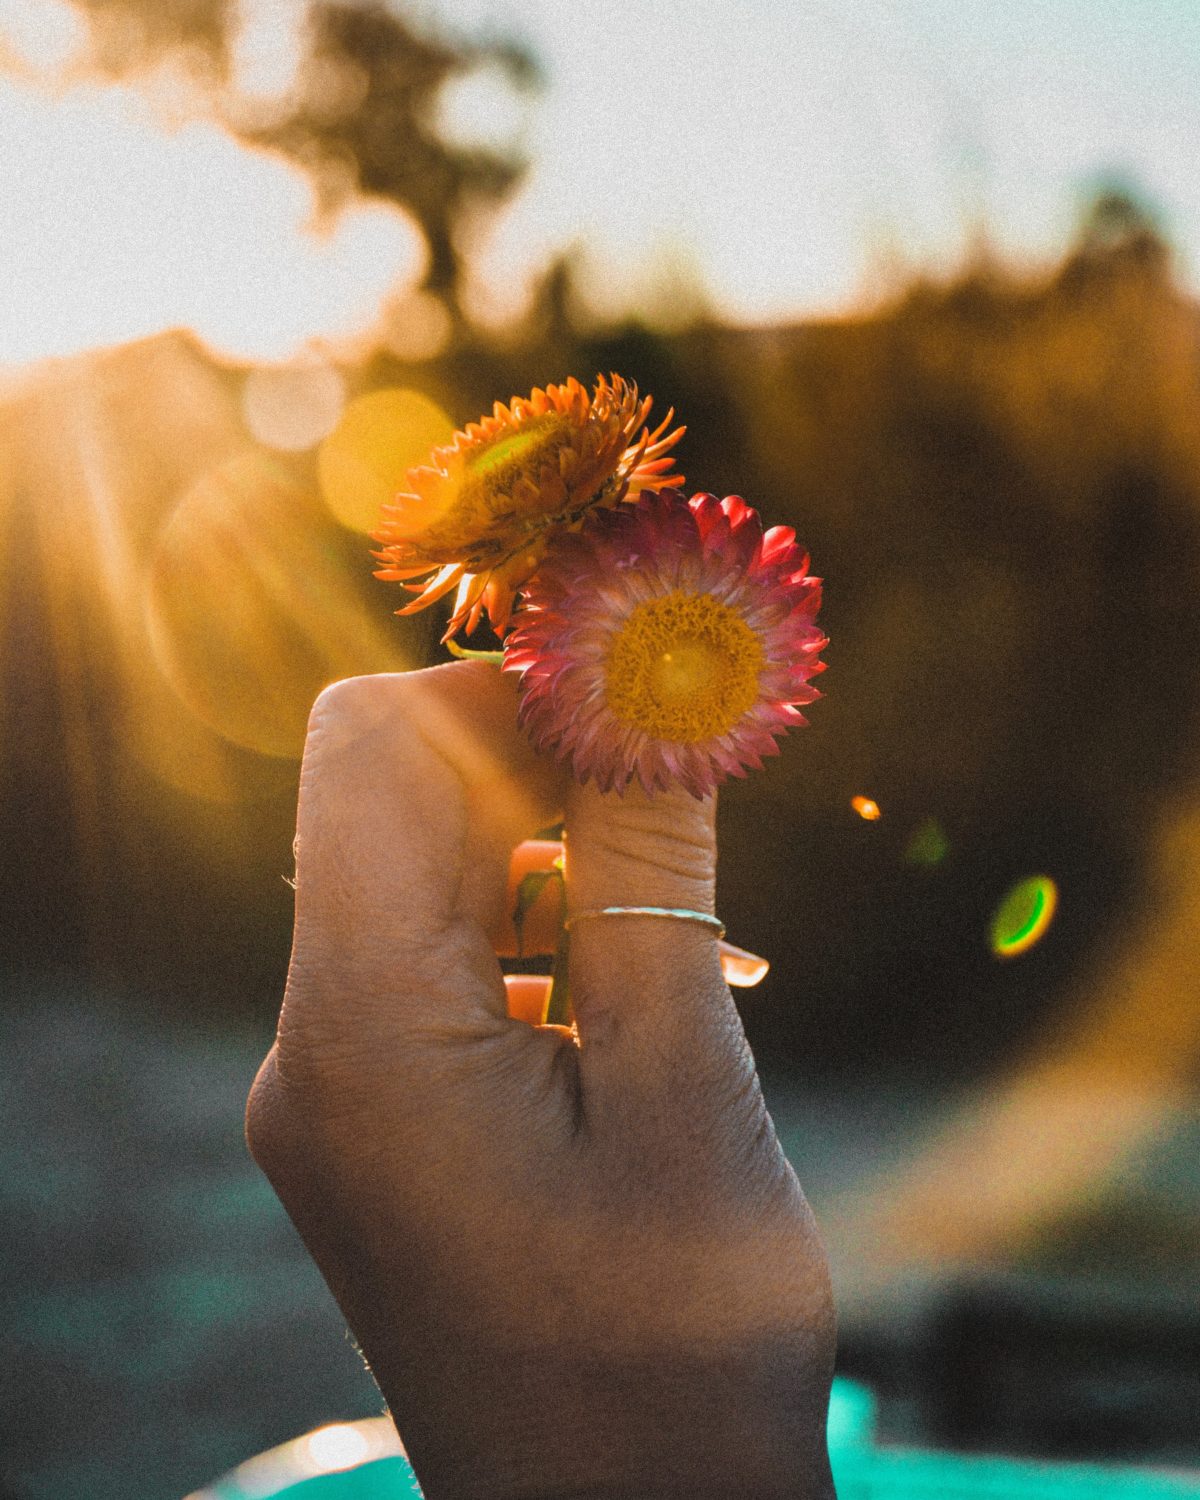 10 Simple Vitalist Practices To Support Well-Being | Herbal Academy | The main tenant of Vitalist herbalism is to remove obstacles to wellness. Here are 10 simple Vitalist practices that can positively impact one’s well-being.